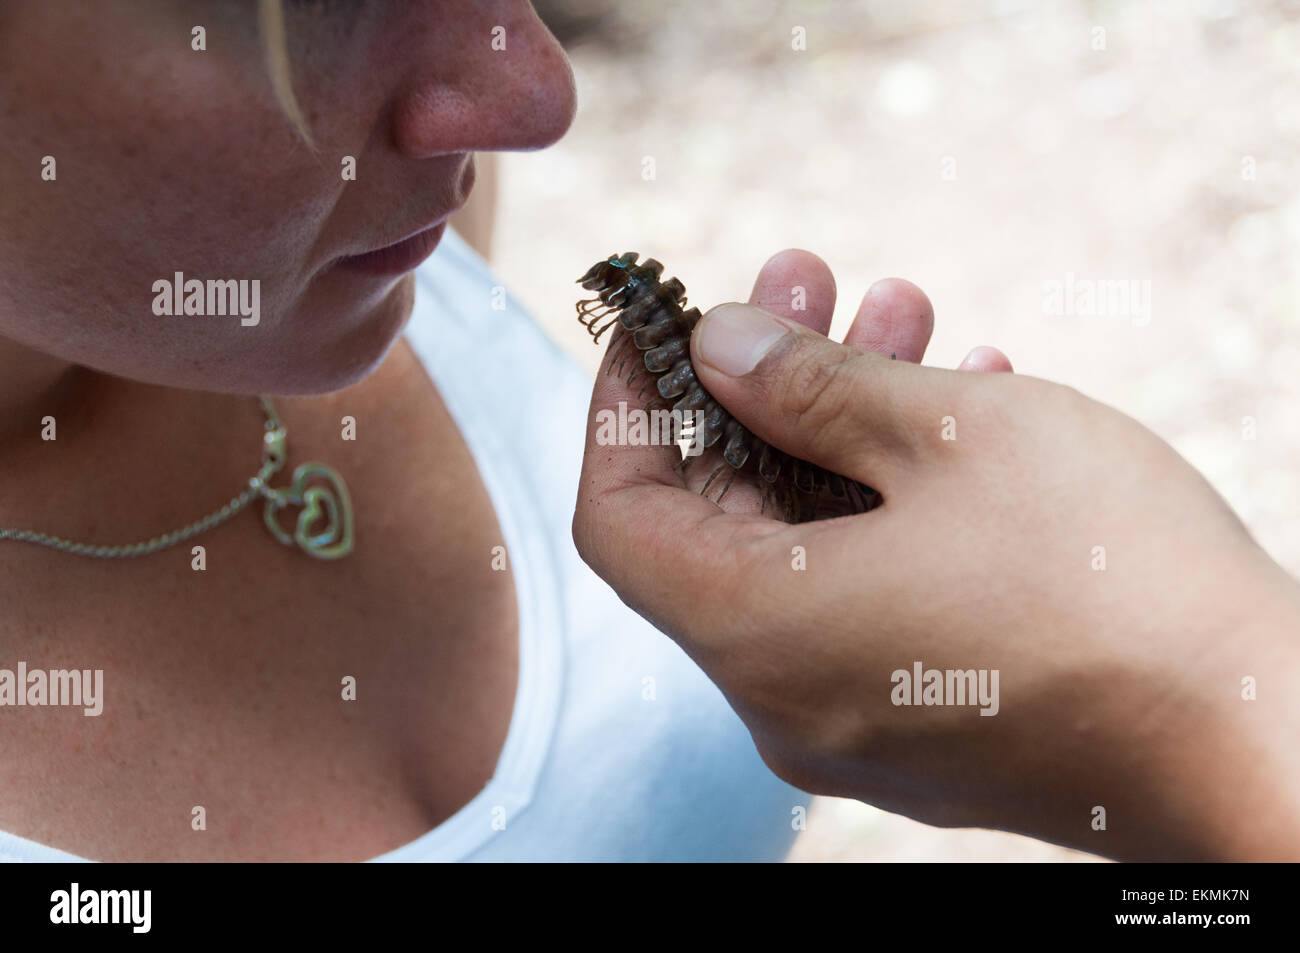 Holding harmless jungle centipede in hands, Danum Valley Conservation, Borneo, Malaysia Stock Photo